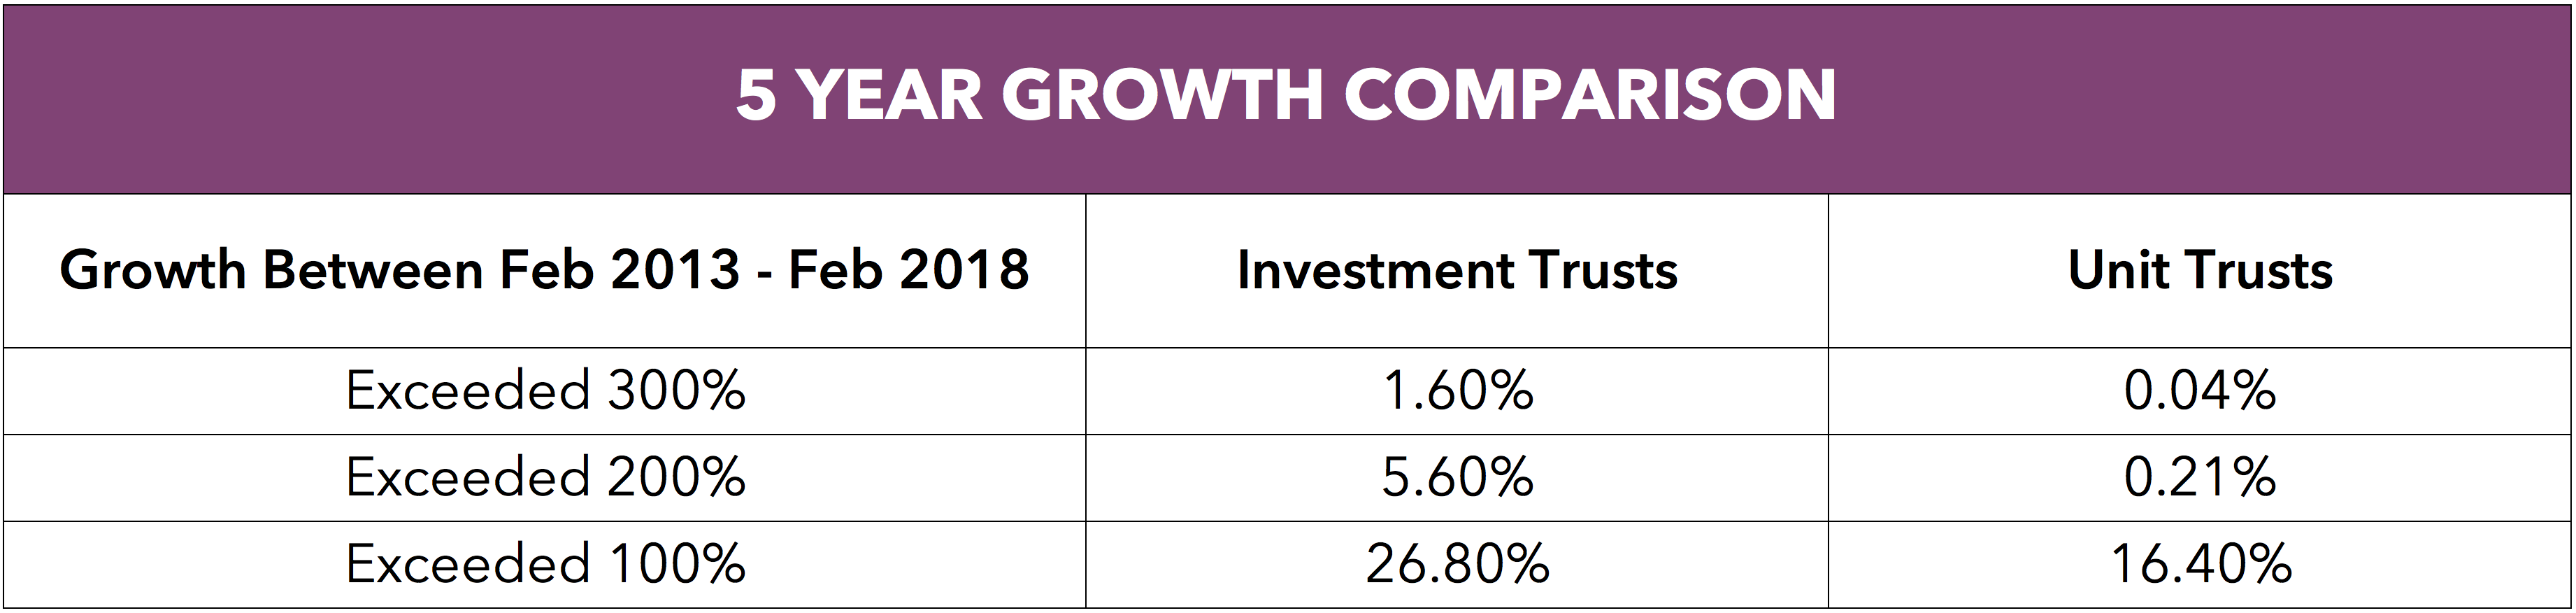 Investment trusts growth comparison.png